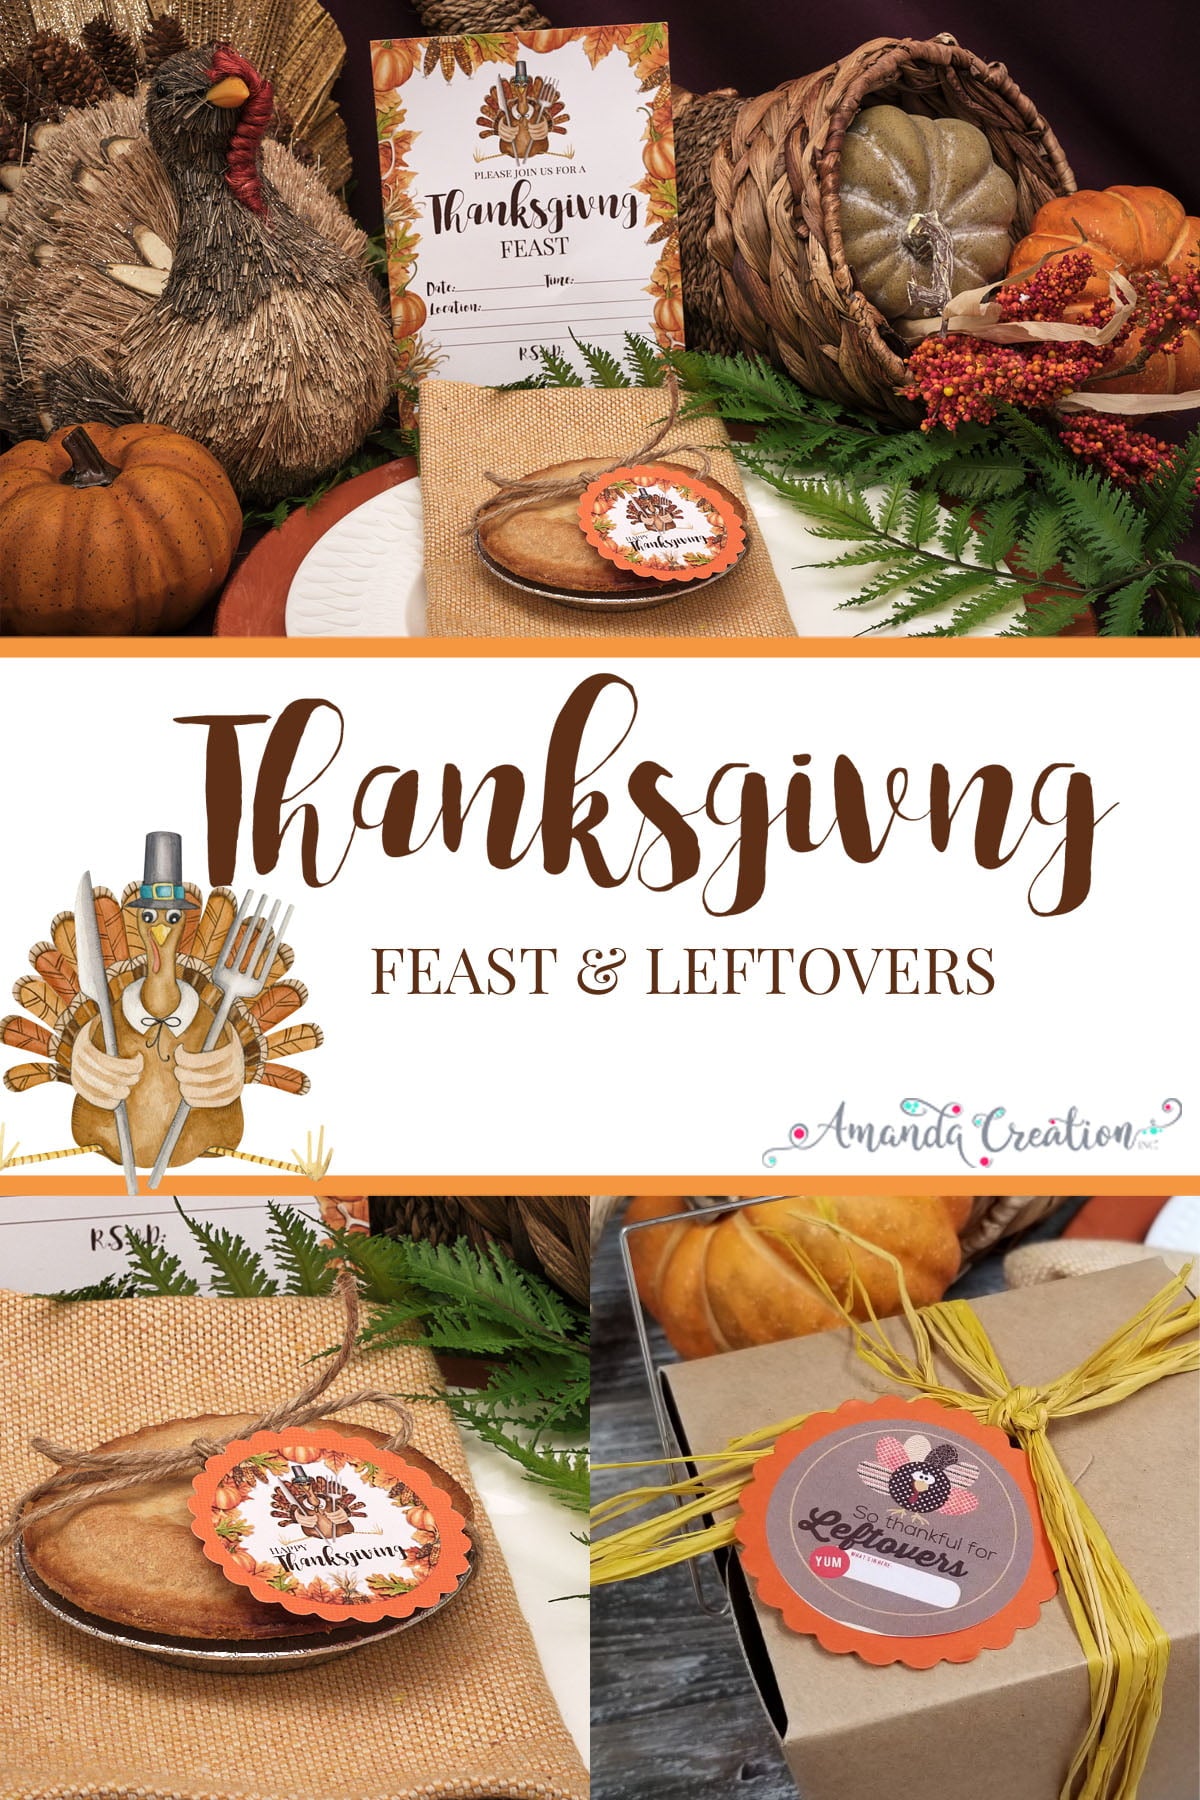 Thanksgiving Feast & Leftovers